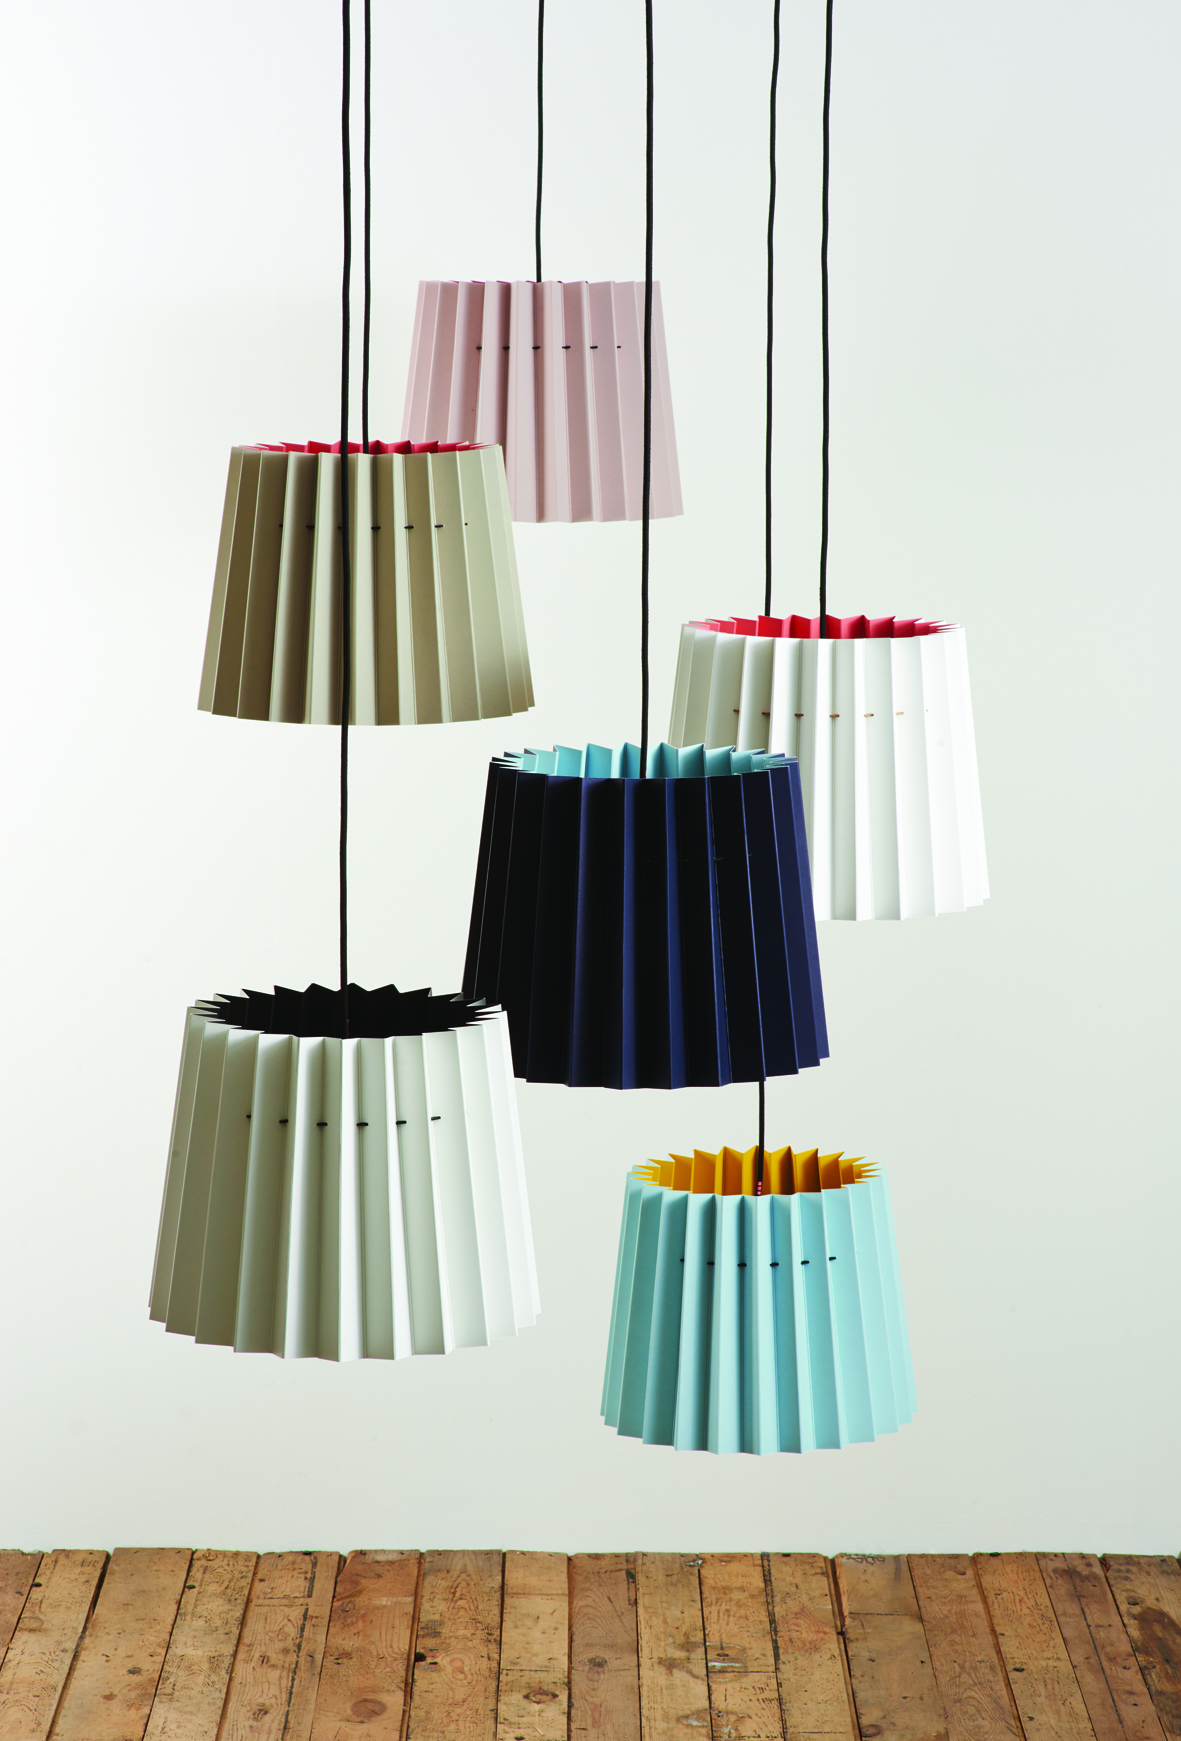 Lane Little Greene Twin Tone Lampshade Group Low Res